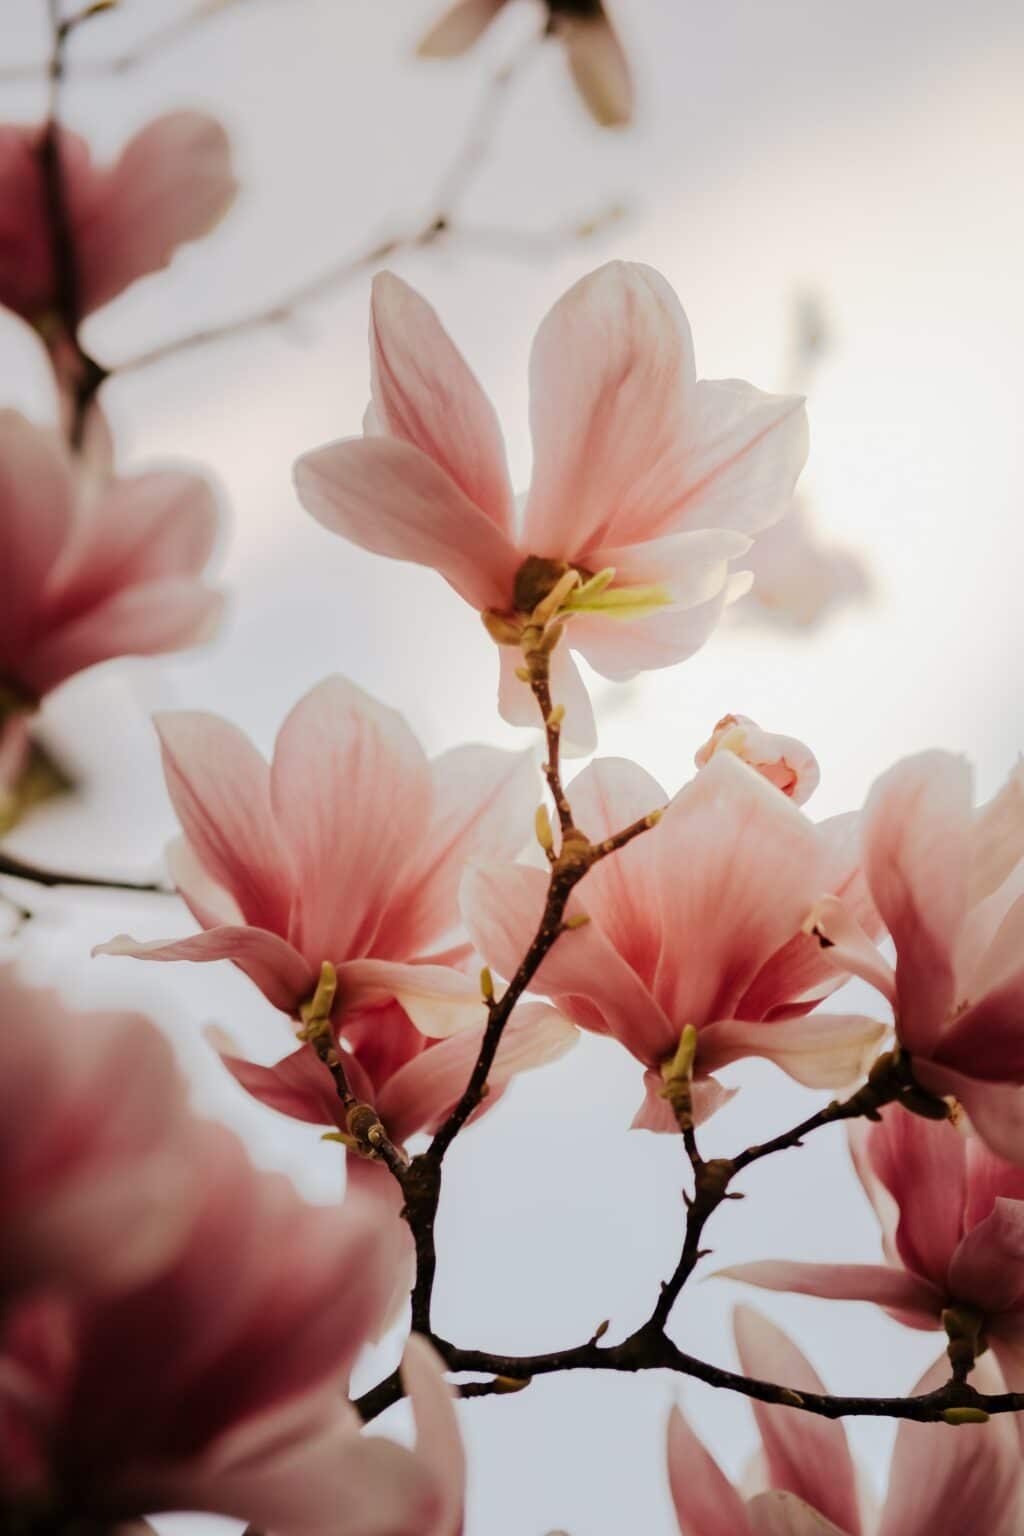 Magnolia Flowers in bloom on the tree with an overall warm tone to the photo